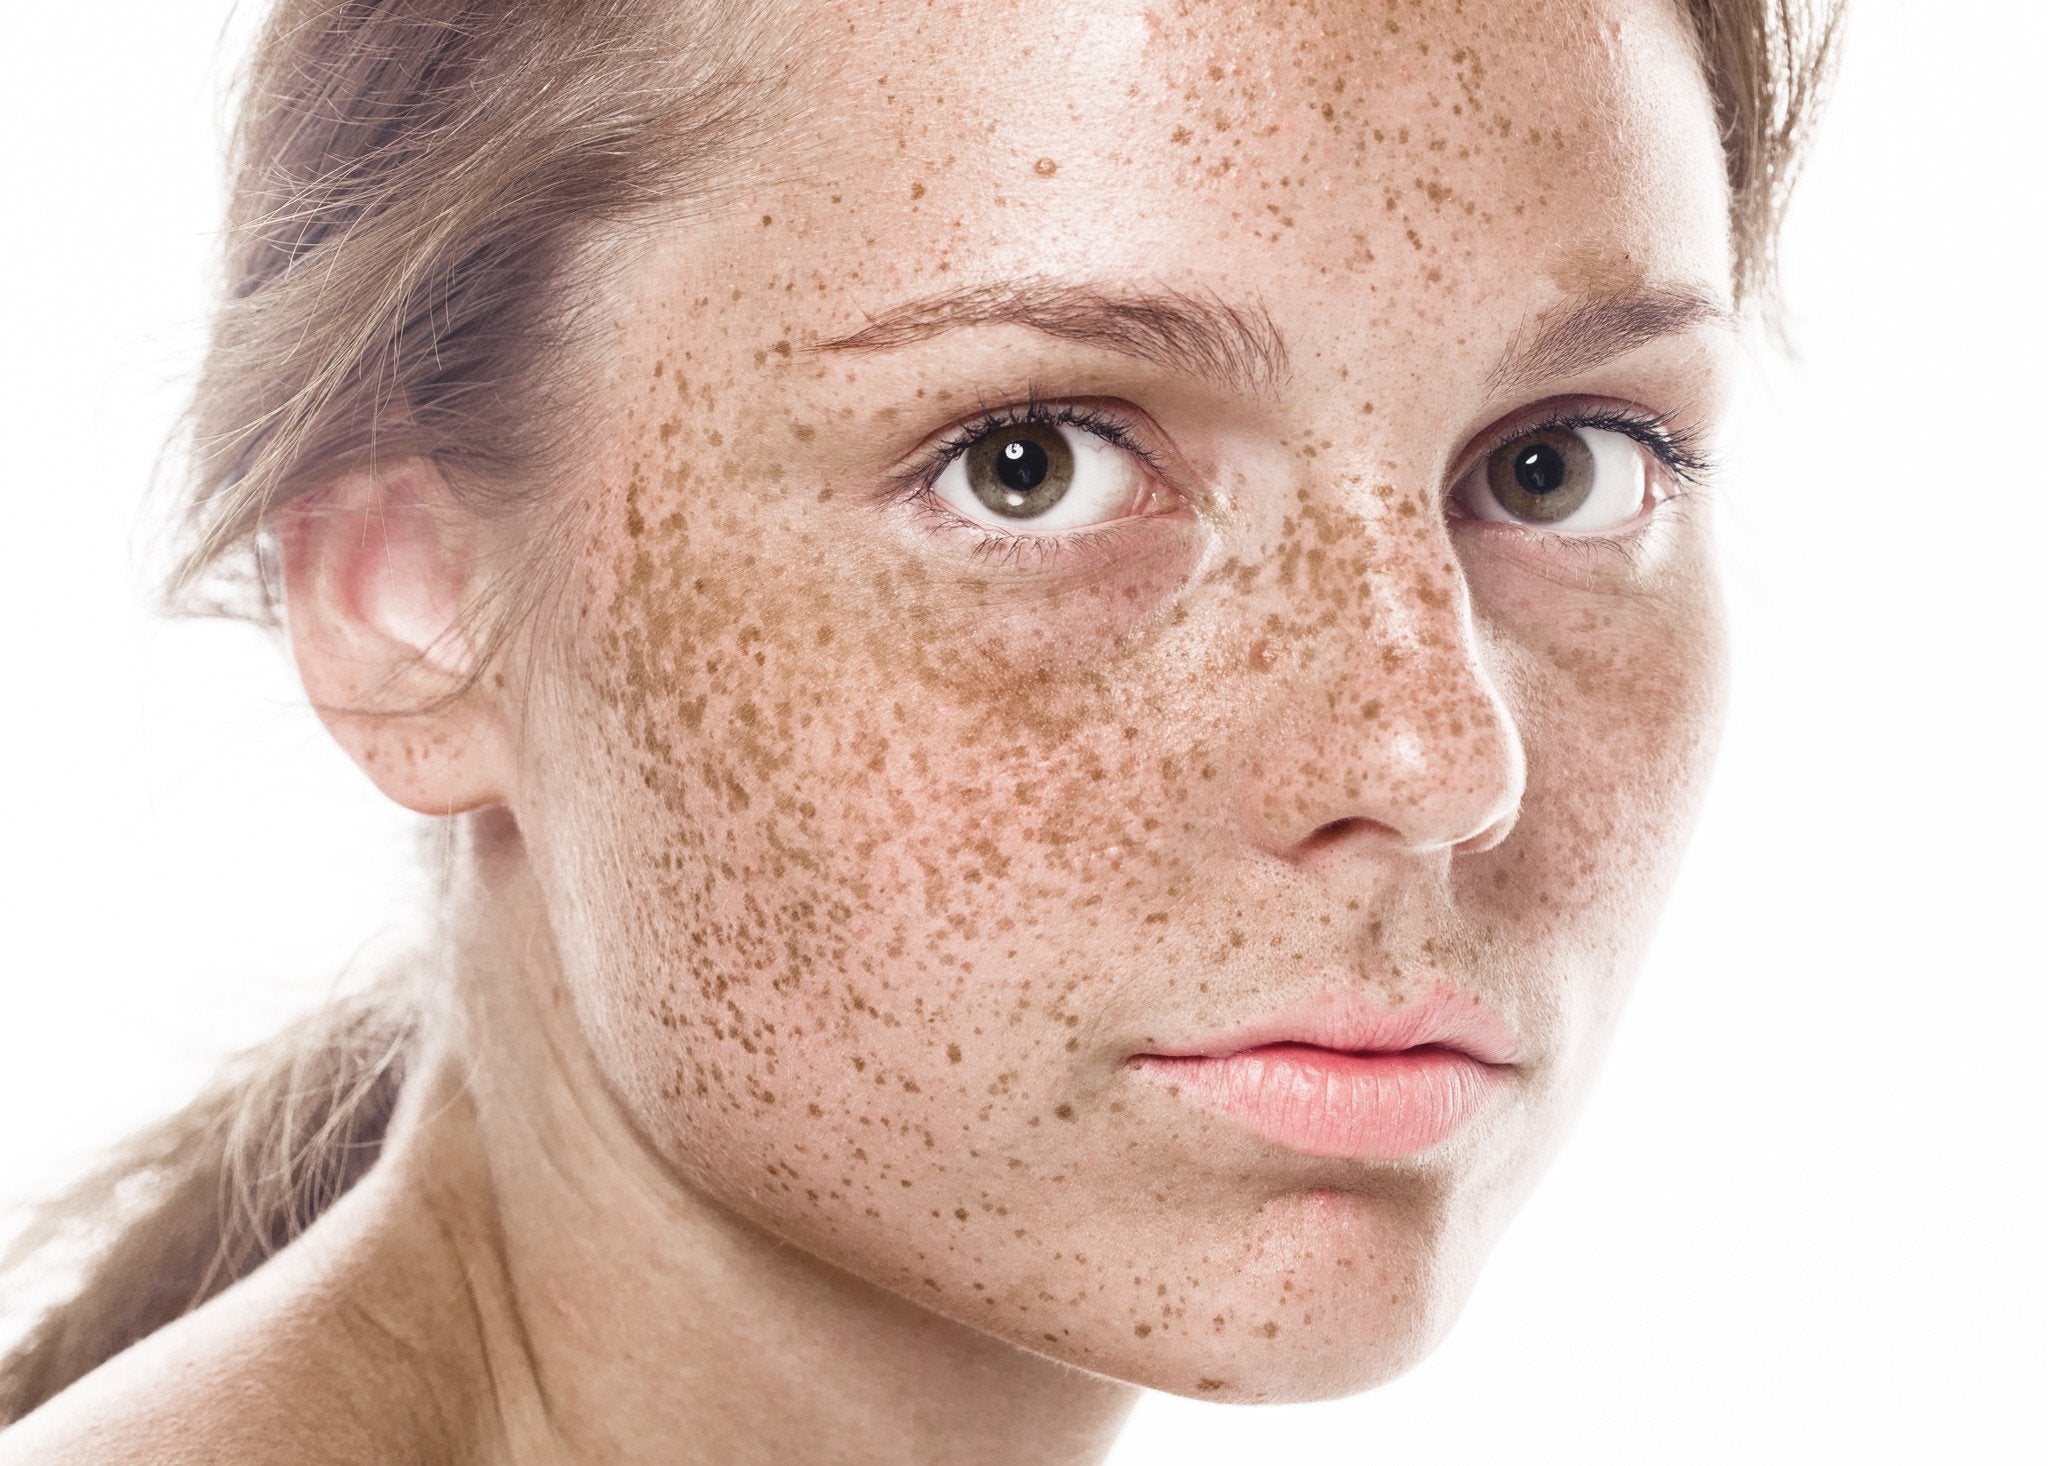 Natural Remedies For Dark Spots On Face And Body - Glimmer Goddess® Organic Skin Care